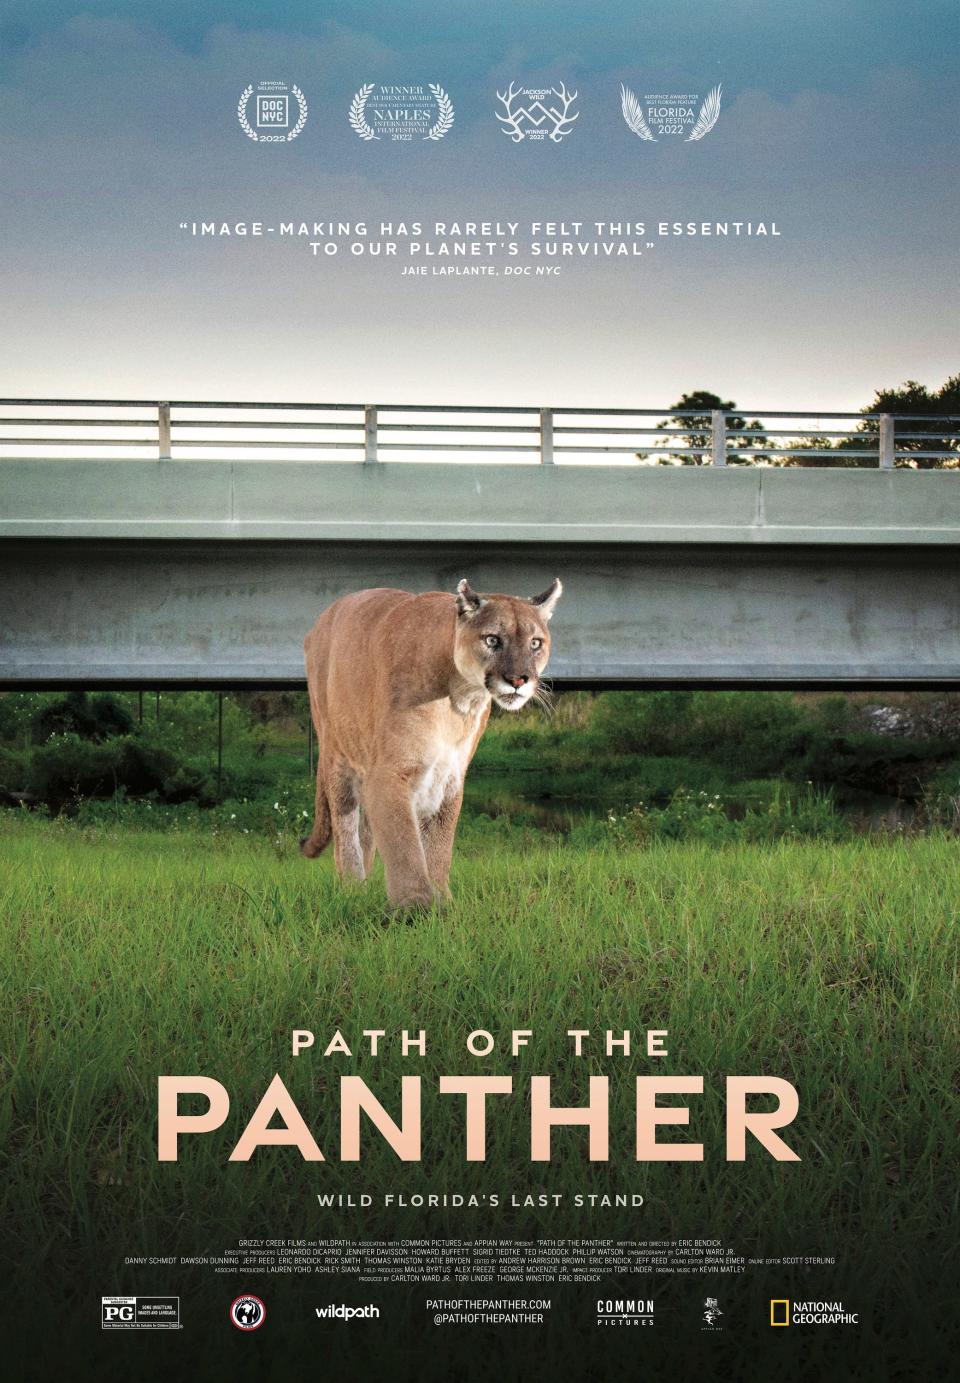 A male Florida panther travels beneath a wildlife underpass to avoid traffic on S.R. 80 near LaBelle in this poster image for the documentary "Path of the Panther." The documentary illustrates the panthers' need for large and connected ranges of land in Florida.